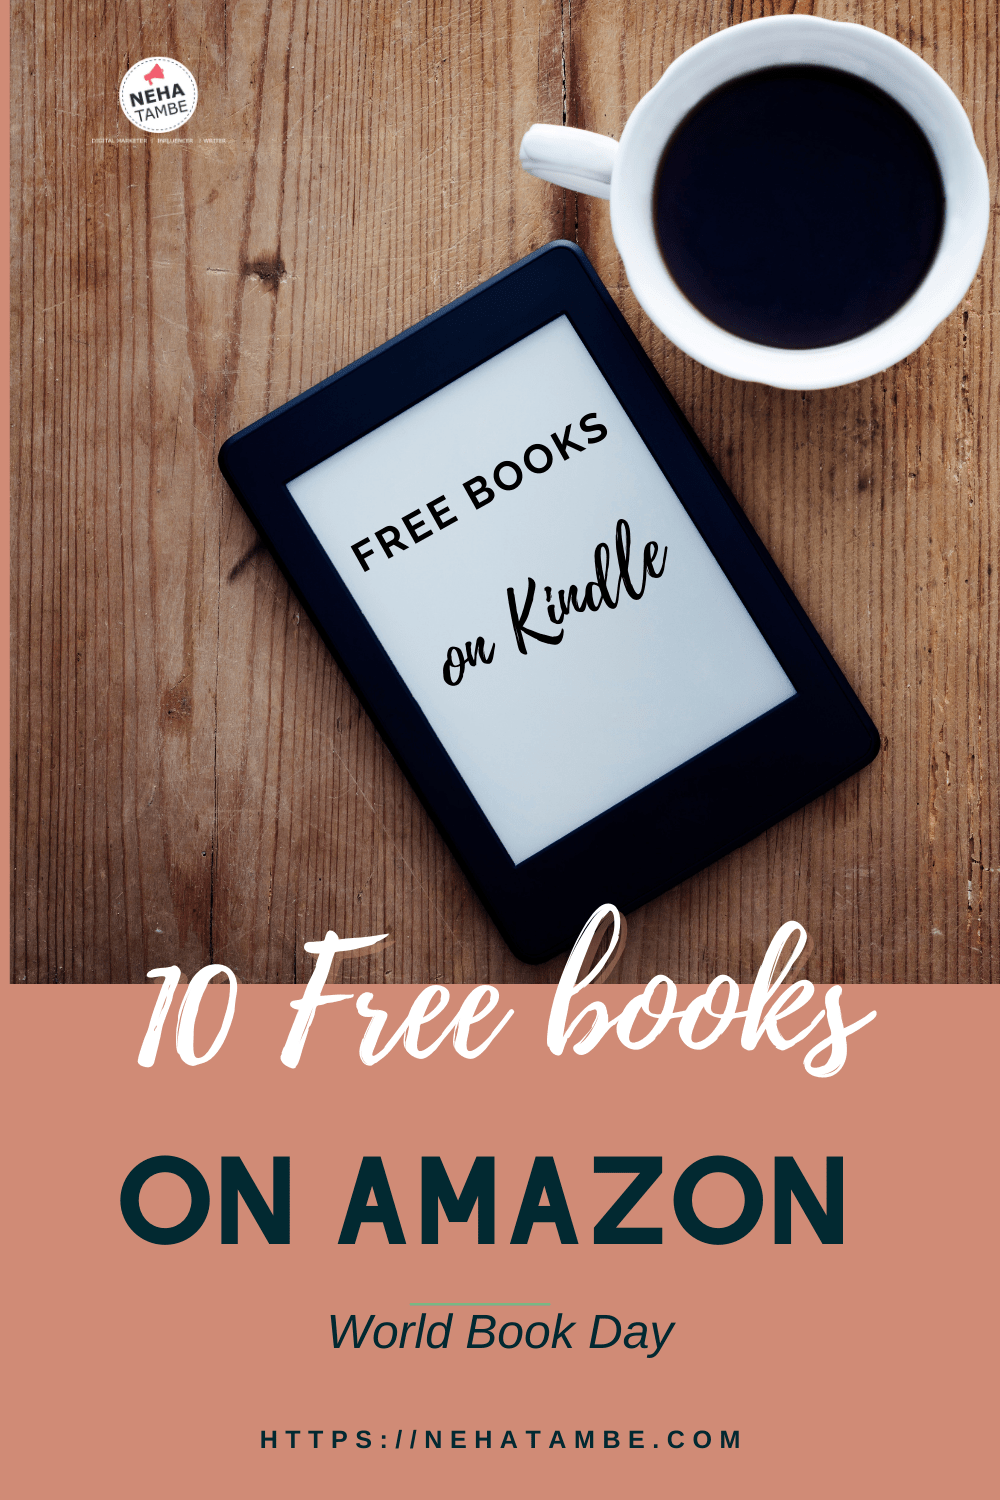 Get free books with World Book Day offer on Amazon